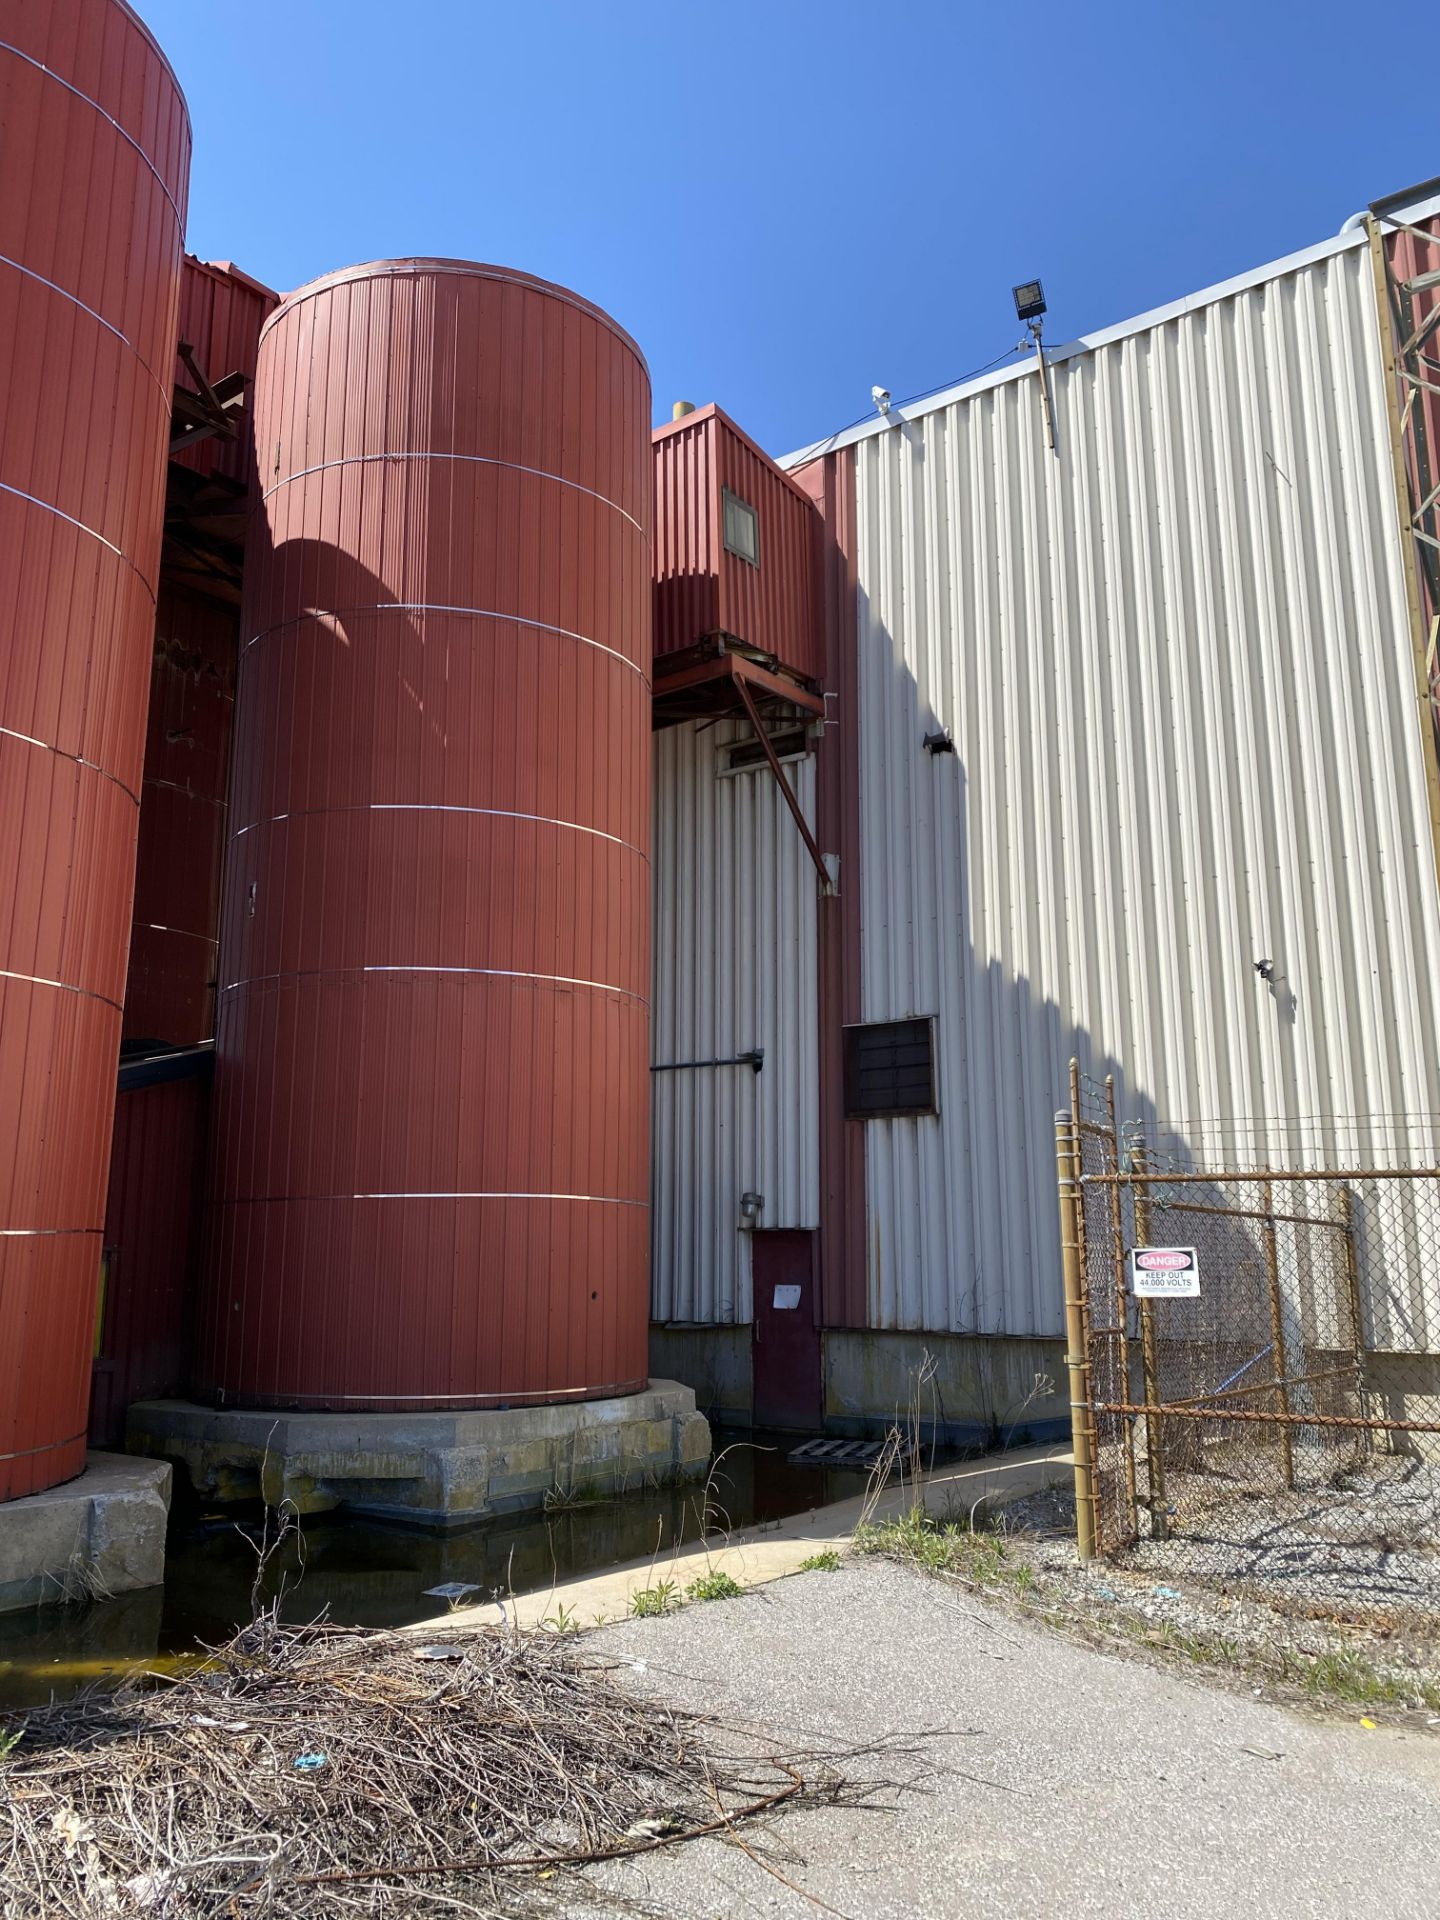 JACKETED STAINLESS STEEL INTERIOR SILO, APPROX. 12'DIA. X 35'H, TANK 631-20